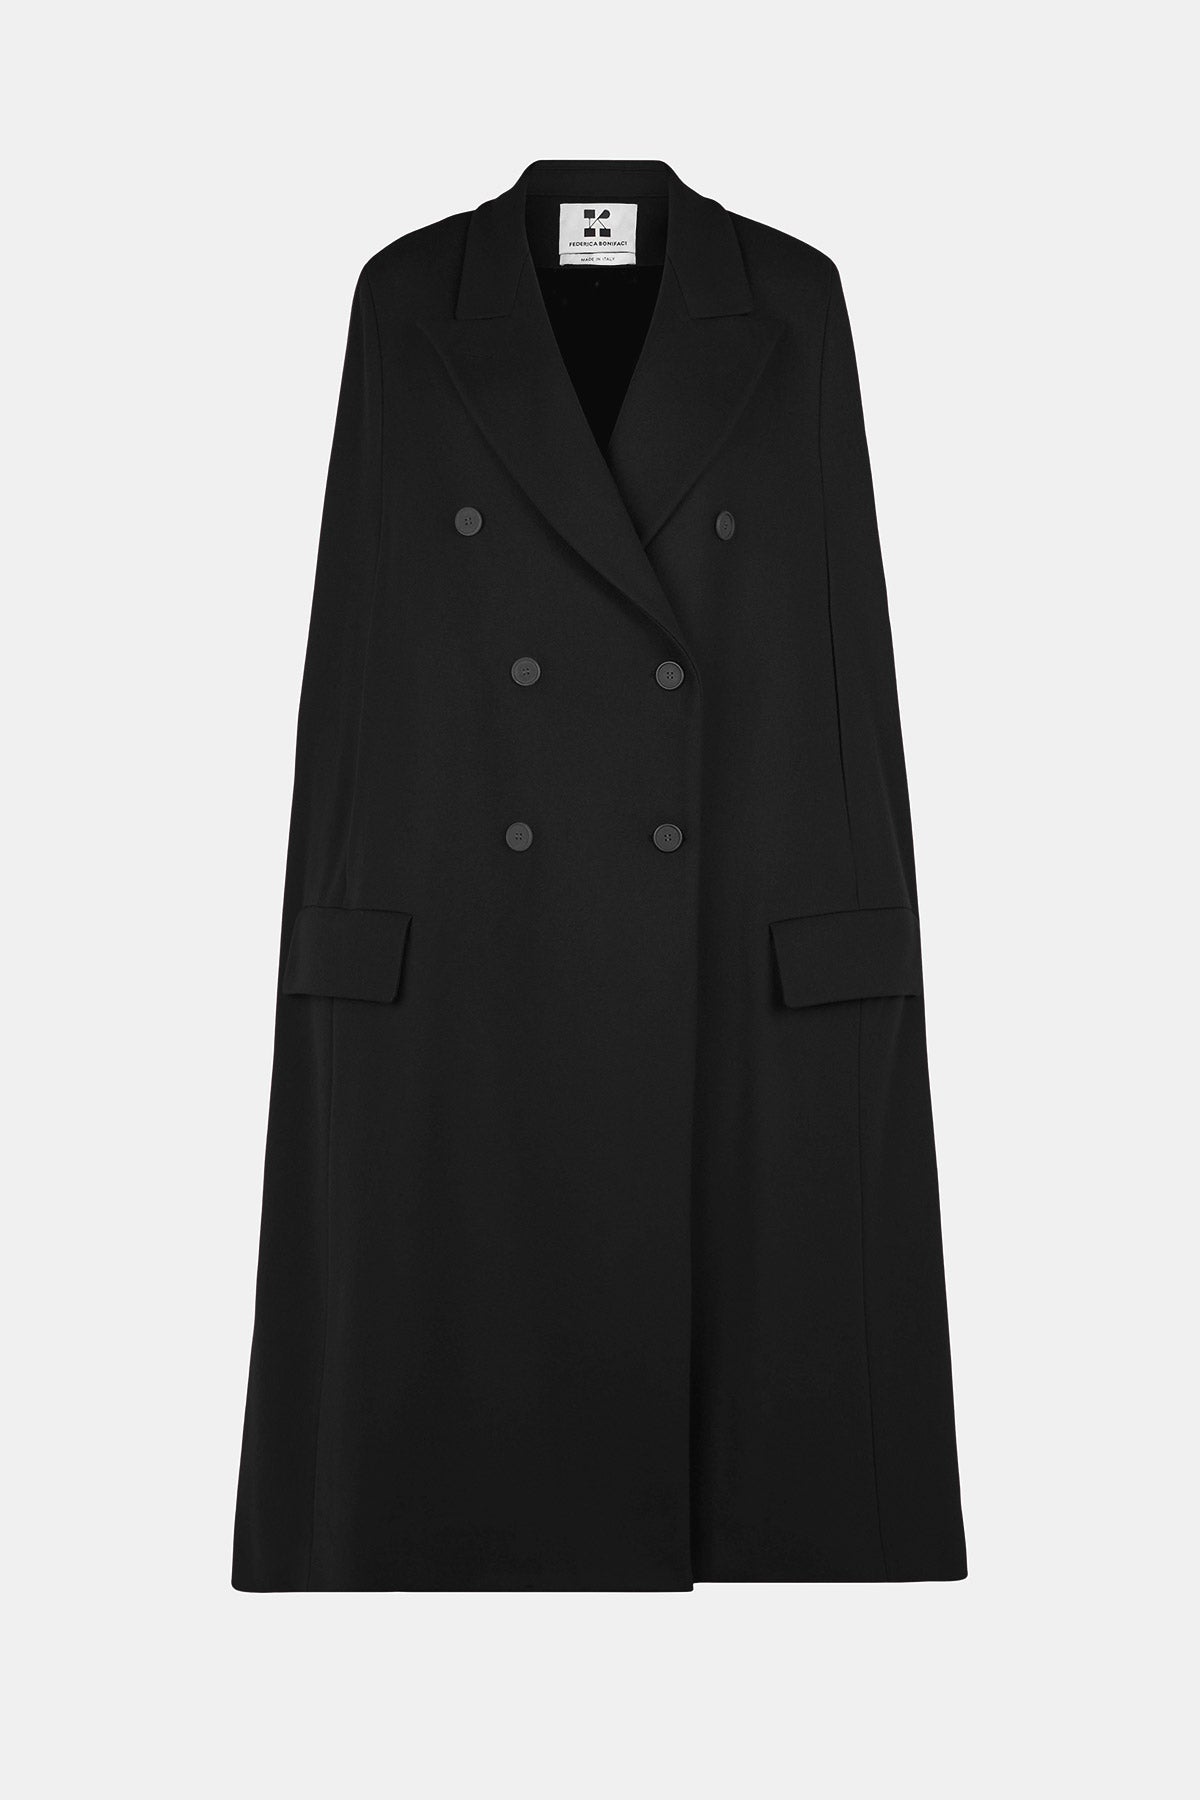 The Double-Breasted Coat Cape